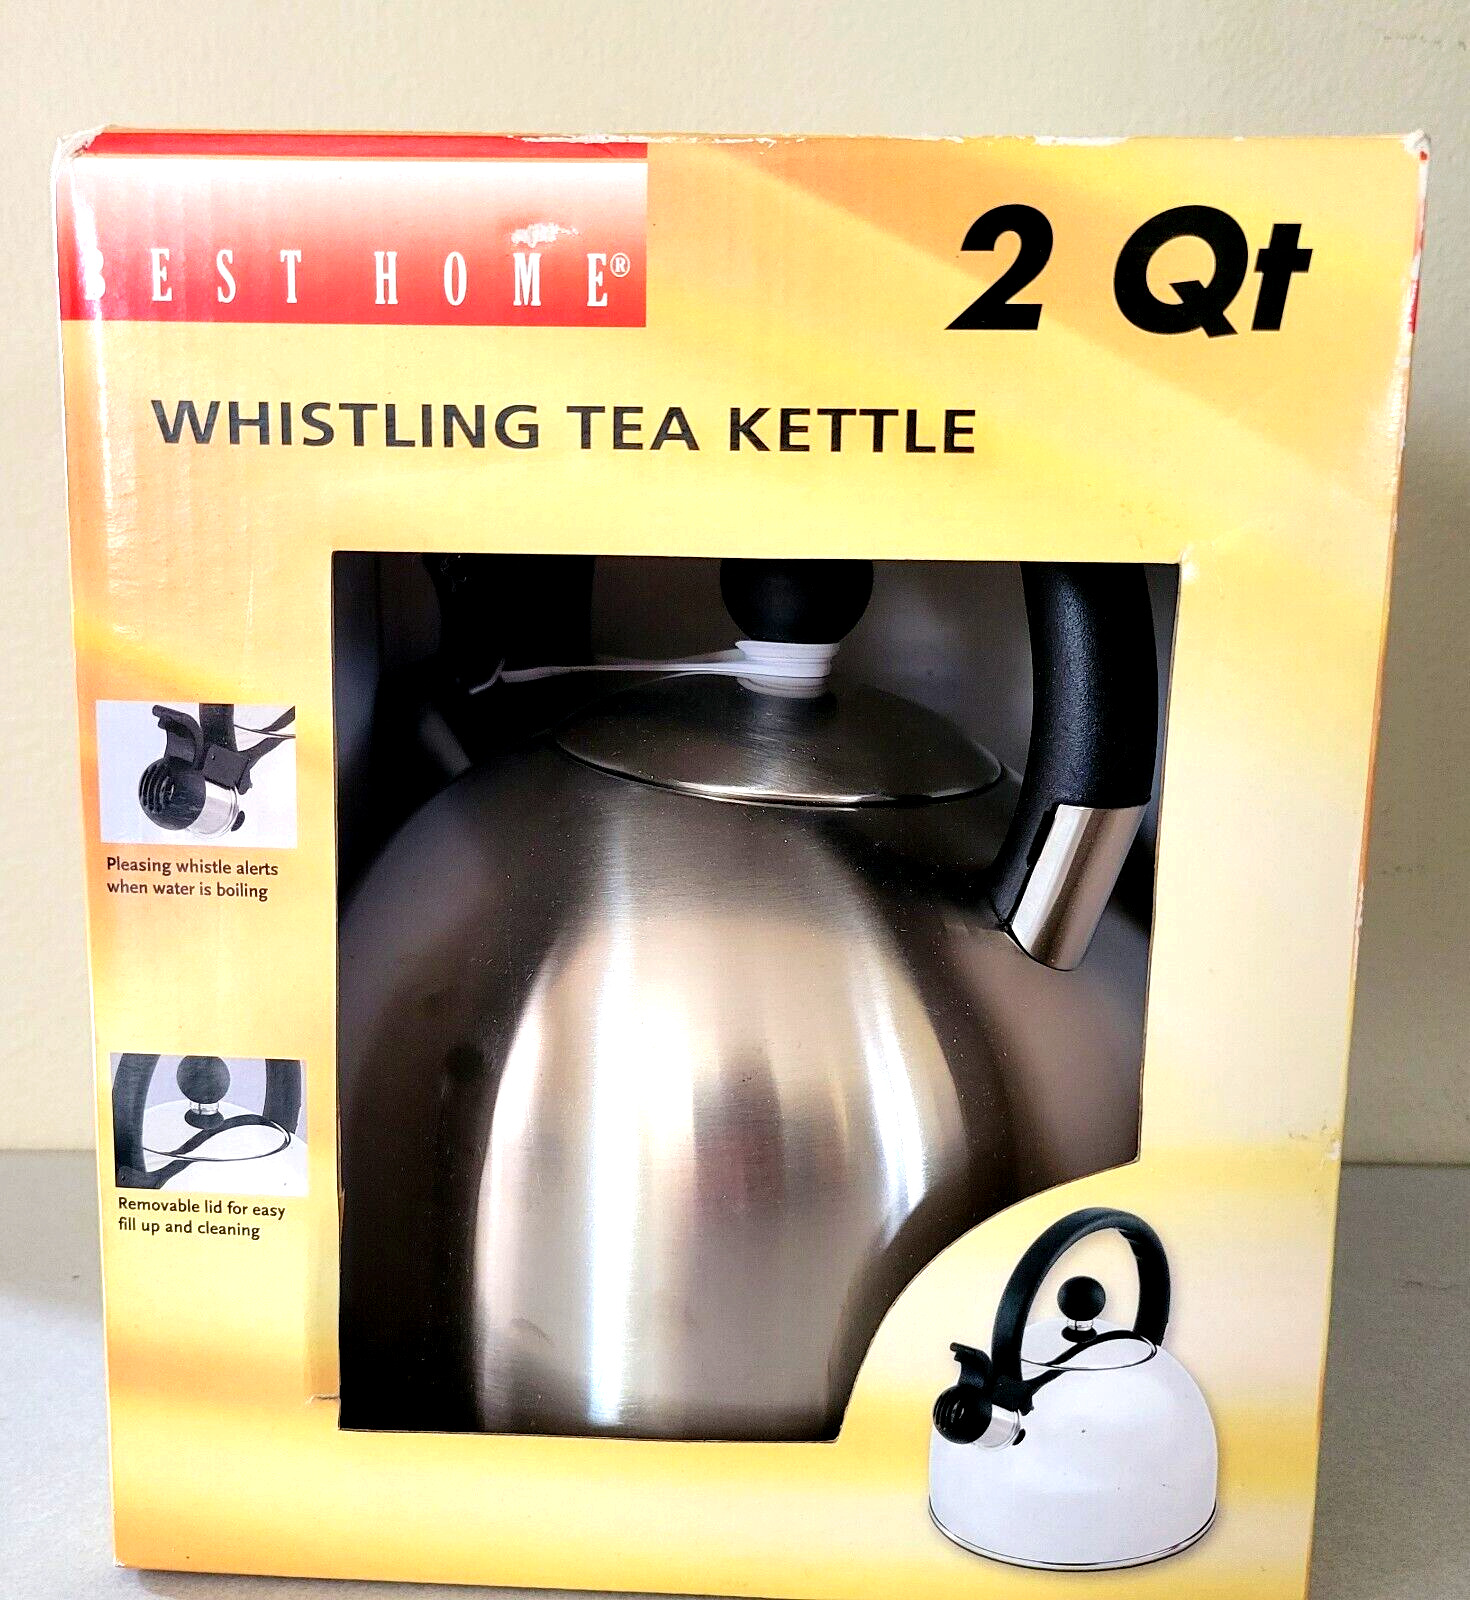 Best Home Stainless Steel Whistling Tea Kettle 2 Qt  (1.9L) Hinged Spout and Lid